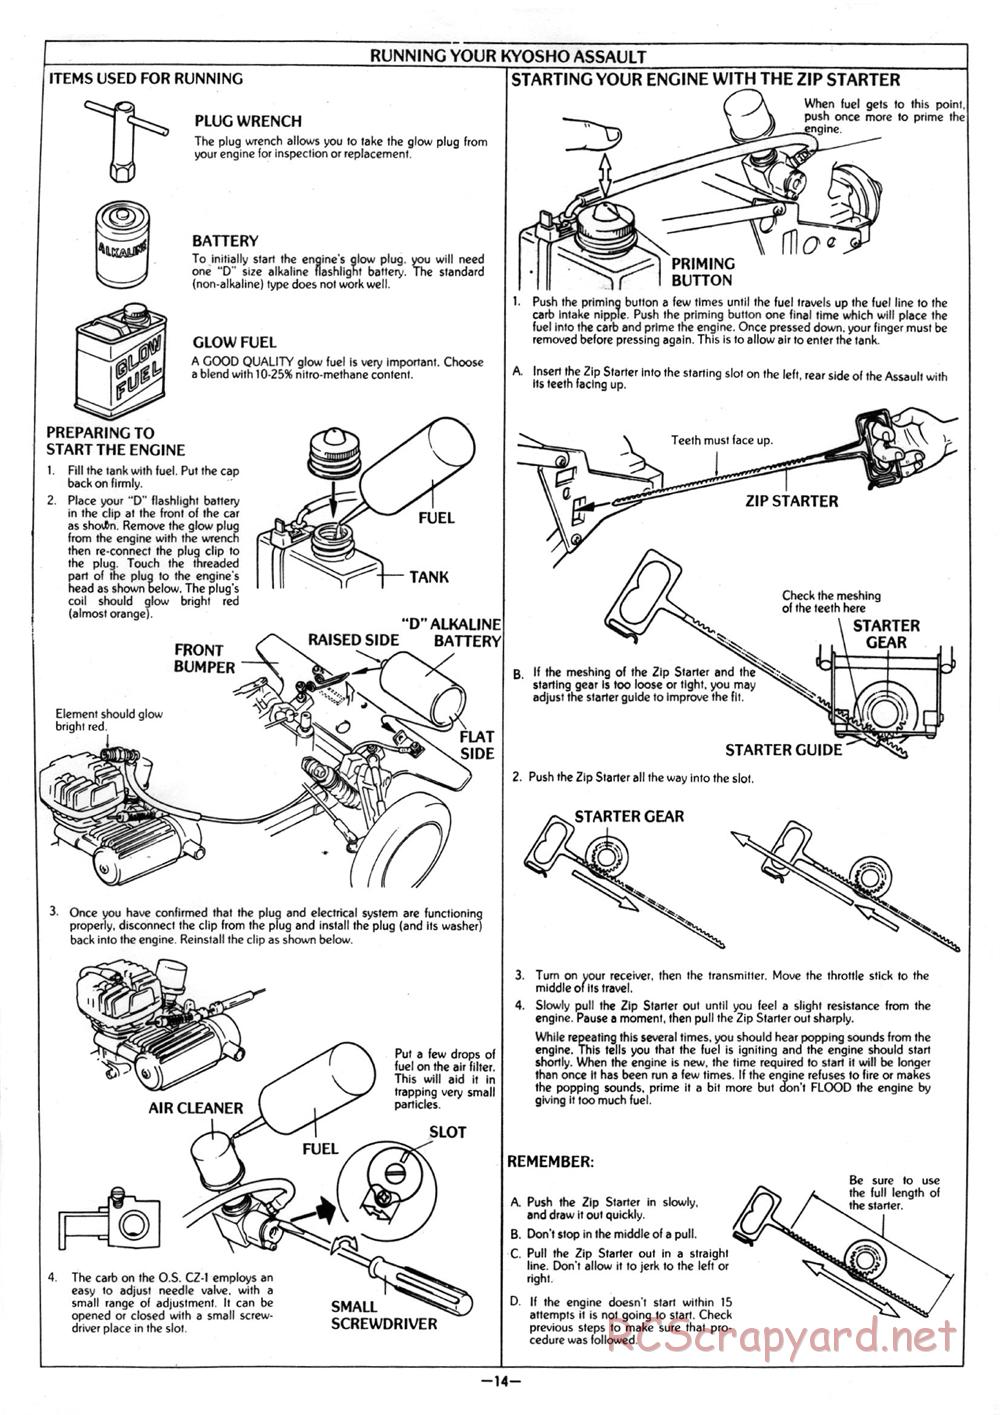 Kyosho - Assault - Manual - Page 14